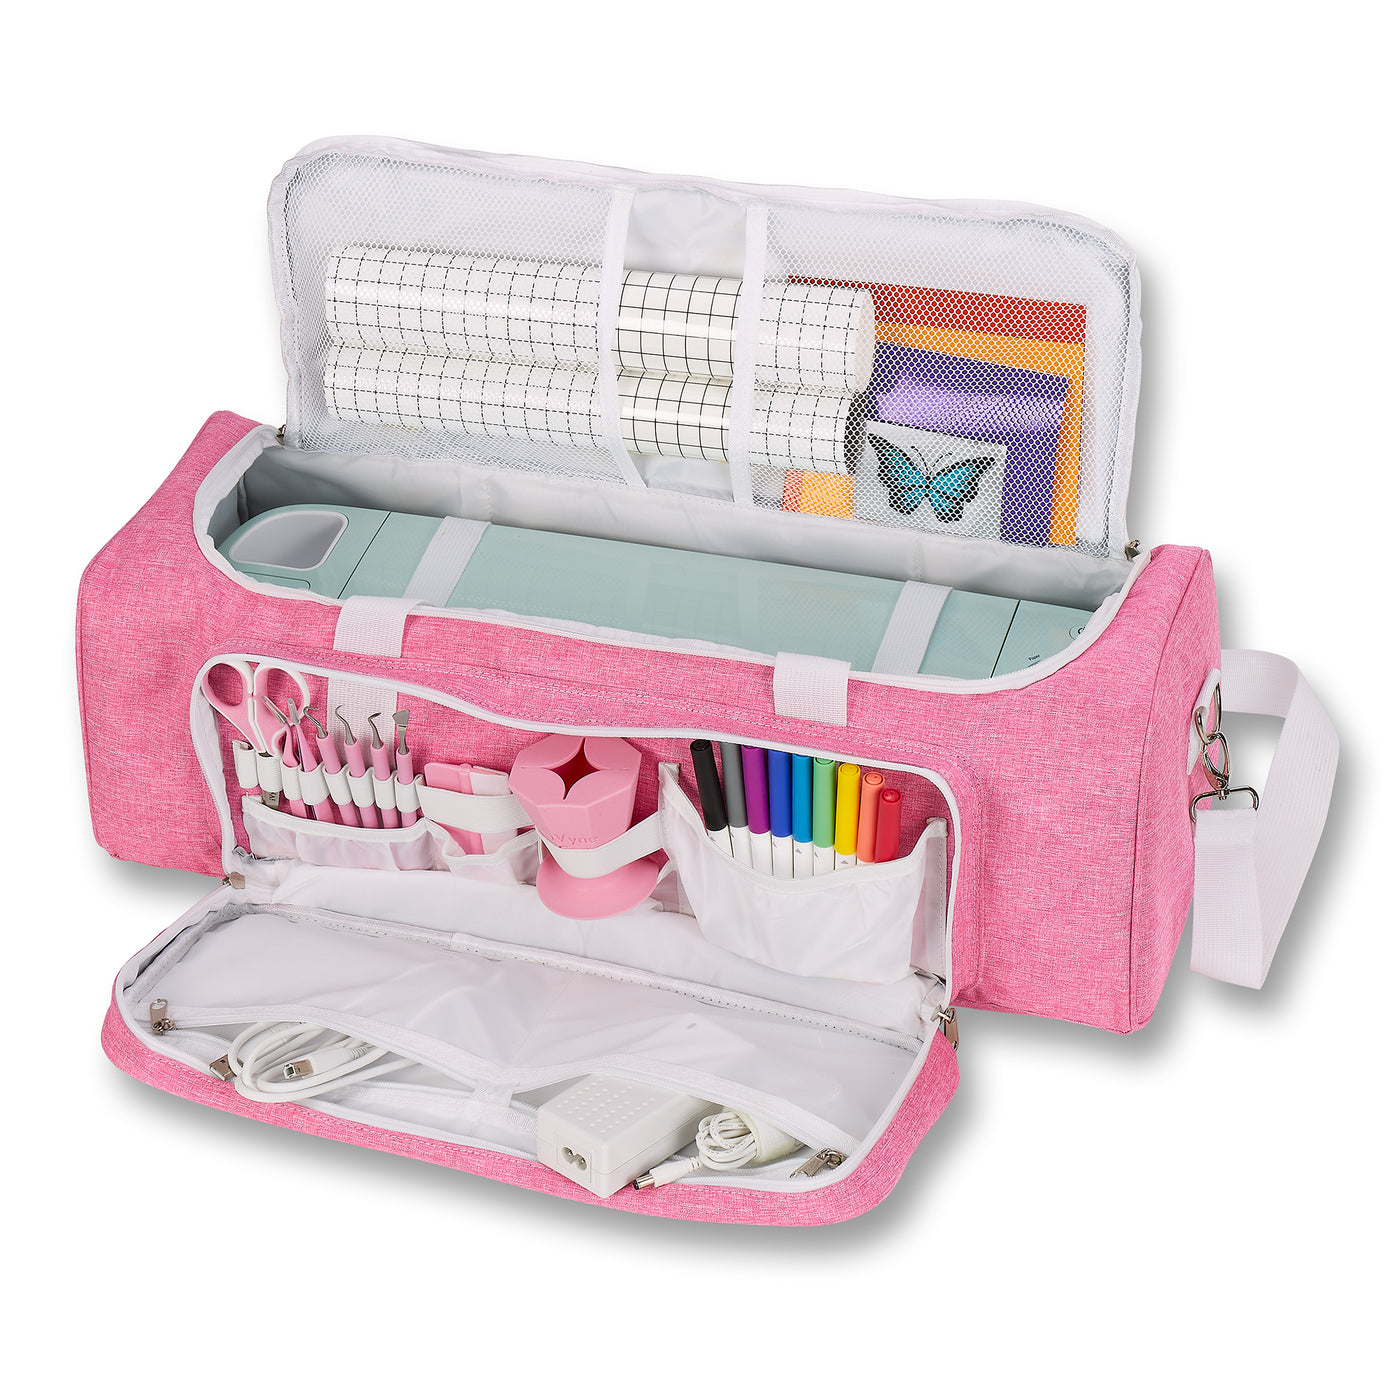 AMOIGEE Carrying Case for Cricut Explore Air 2, Cricut Maker 3, Cricut  Explore 3, Cricut Storage Organizer for Cricut accessories and Suppliers